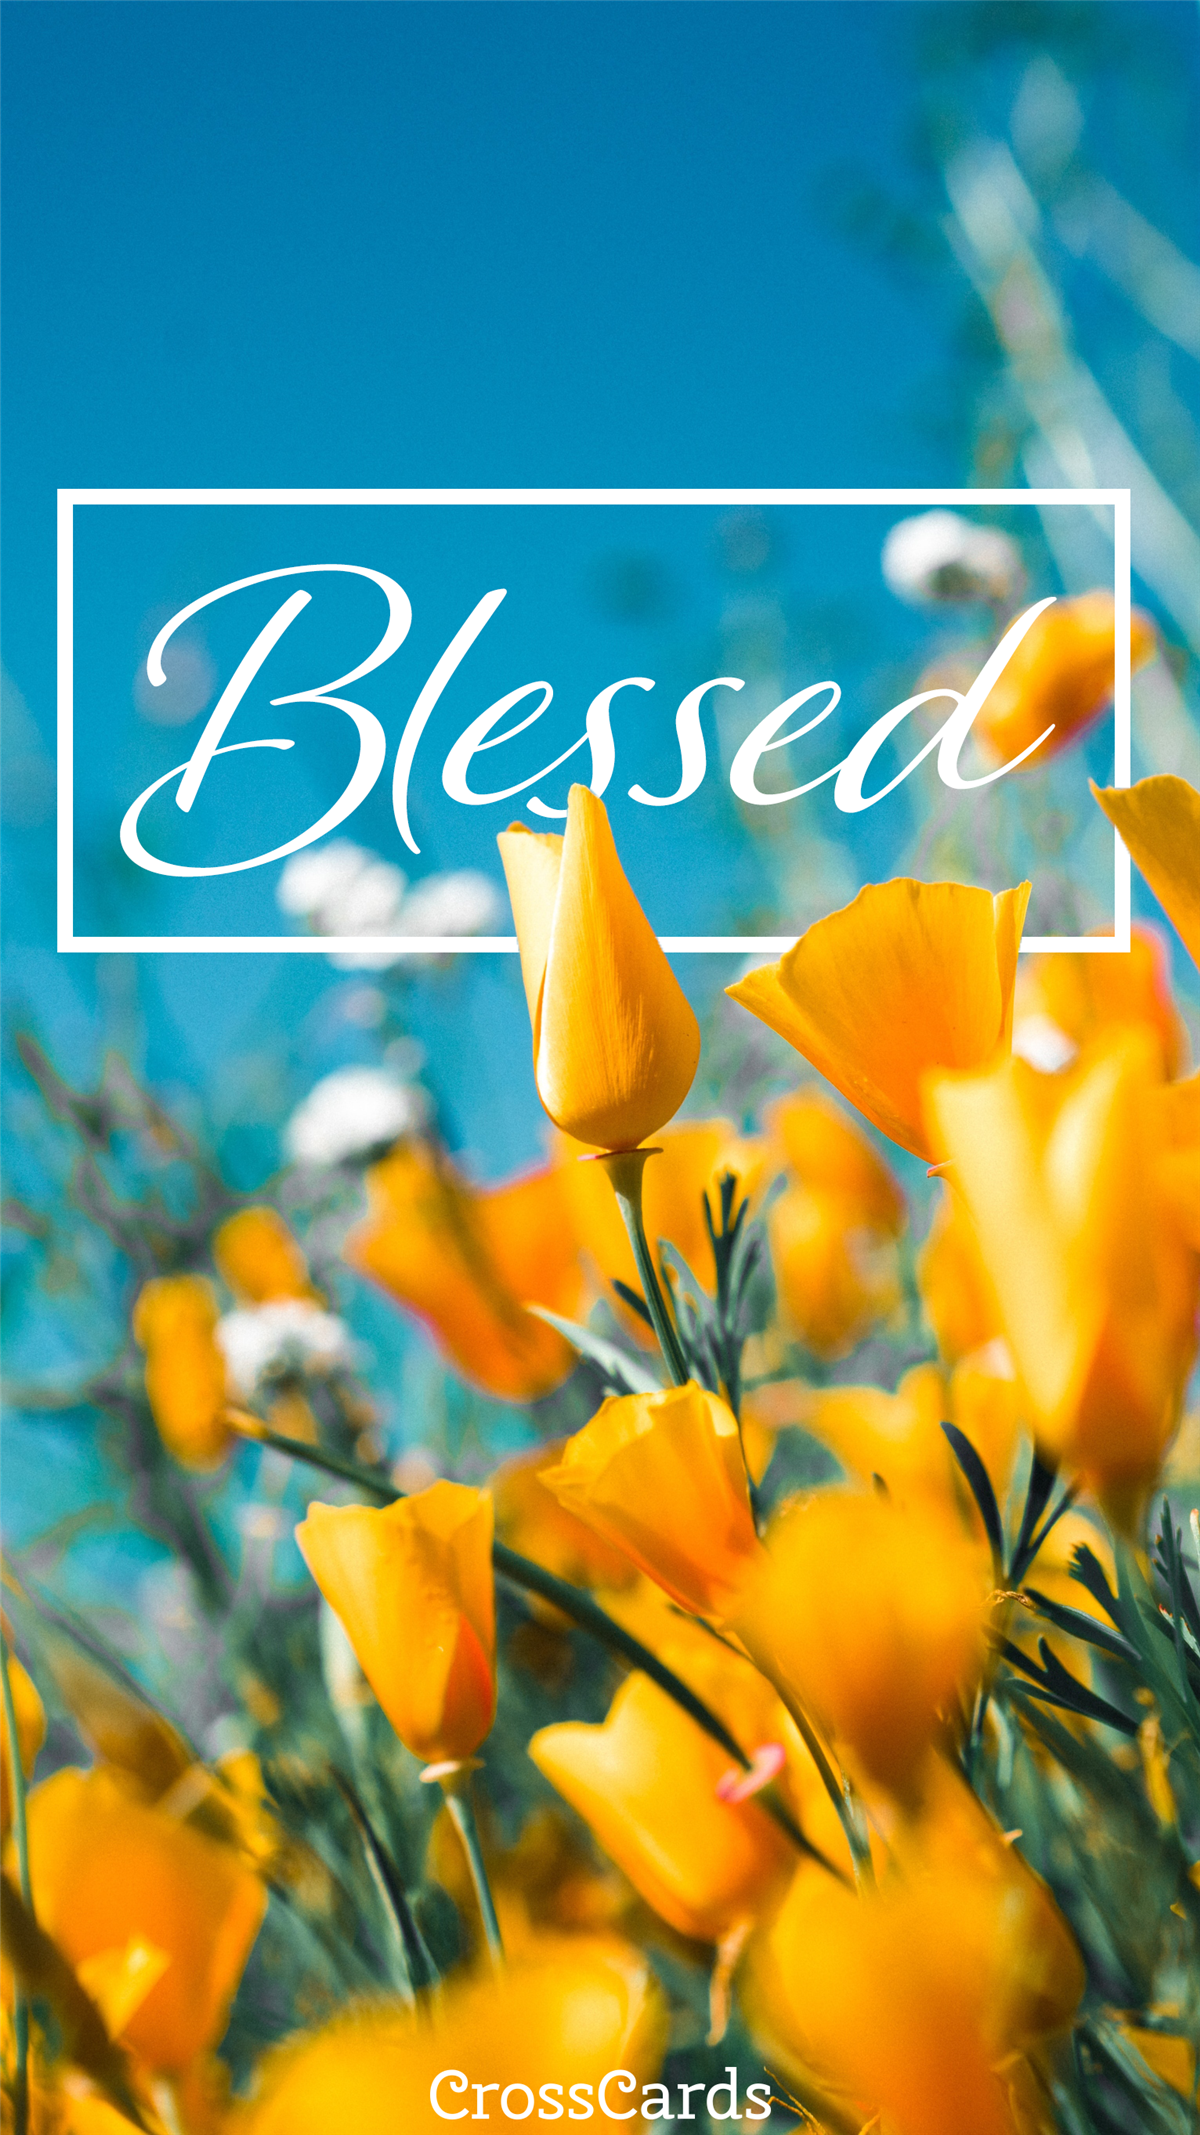 Blessed wallpaper - Phone Wallpaper and Mobile Background